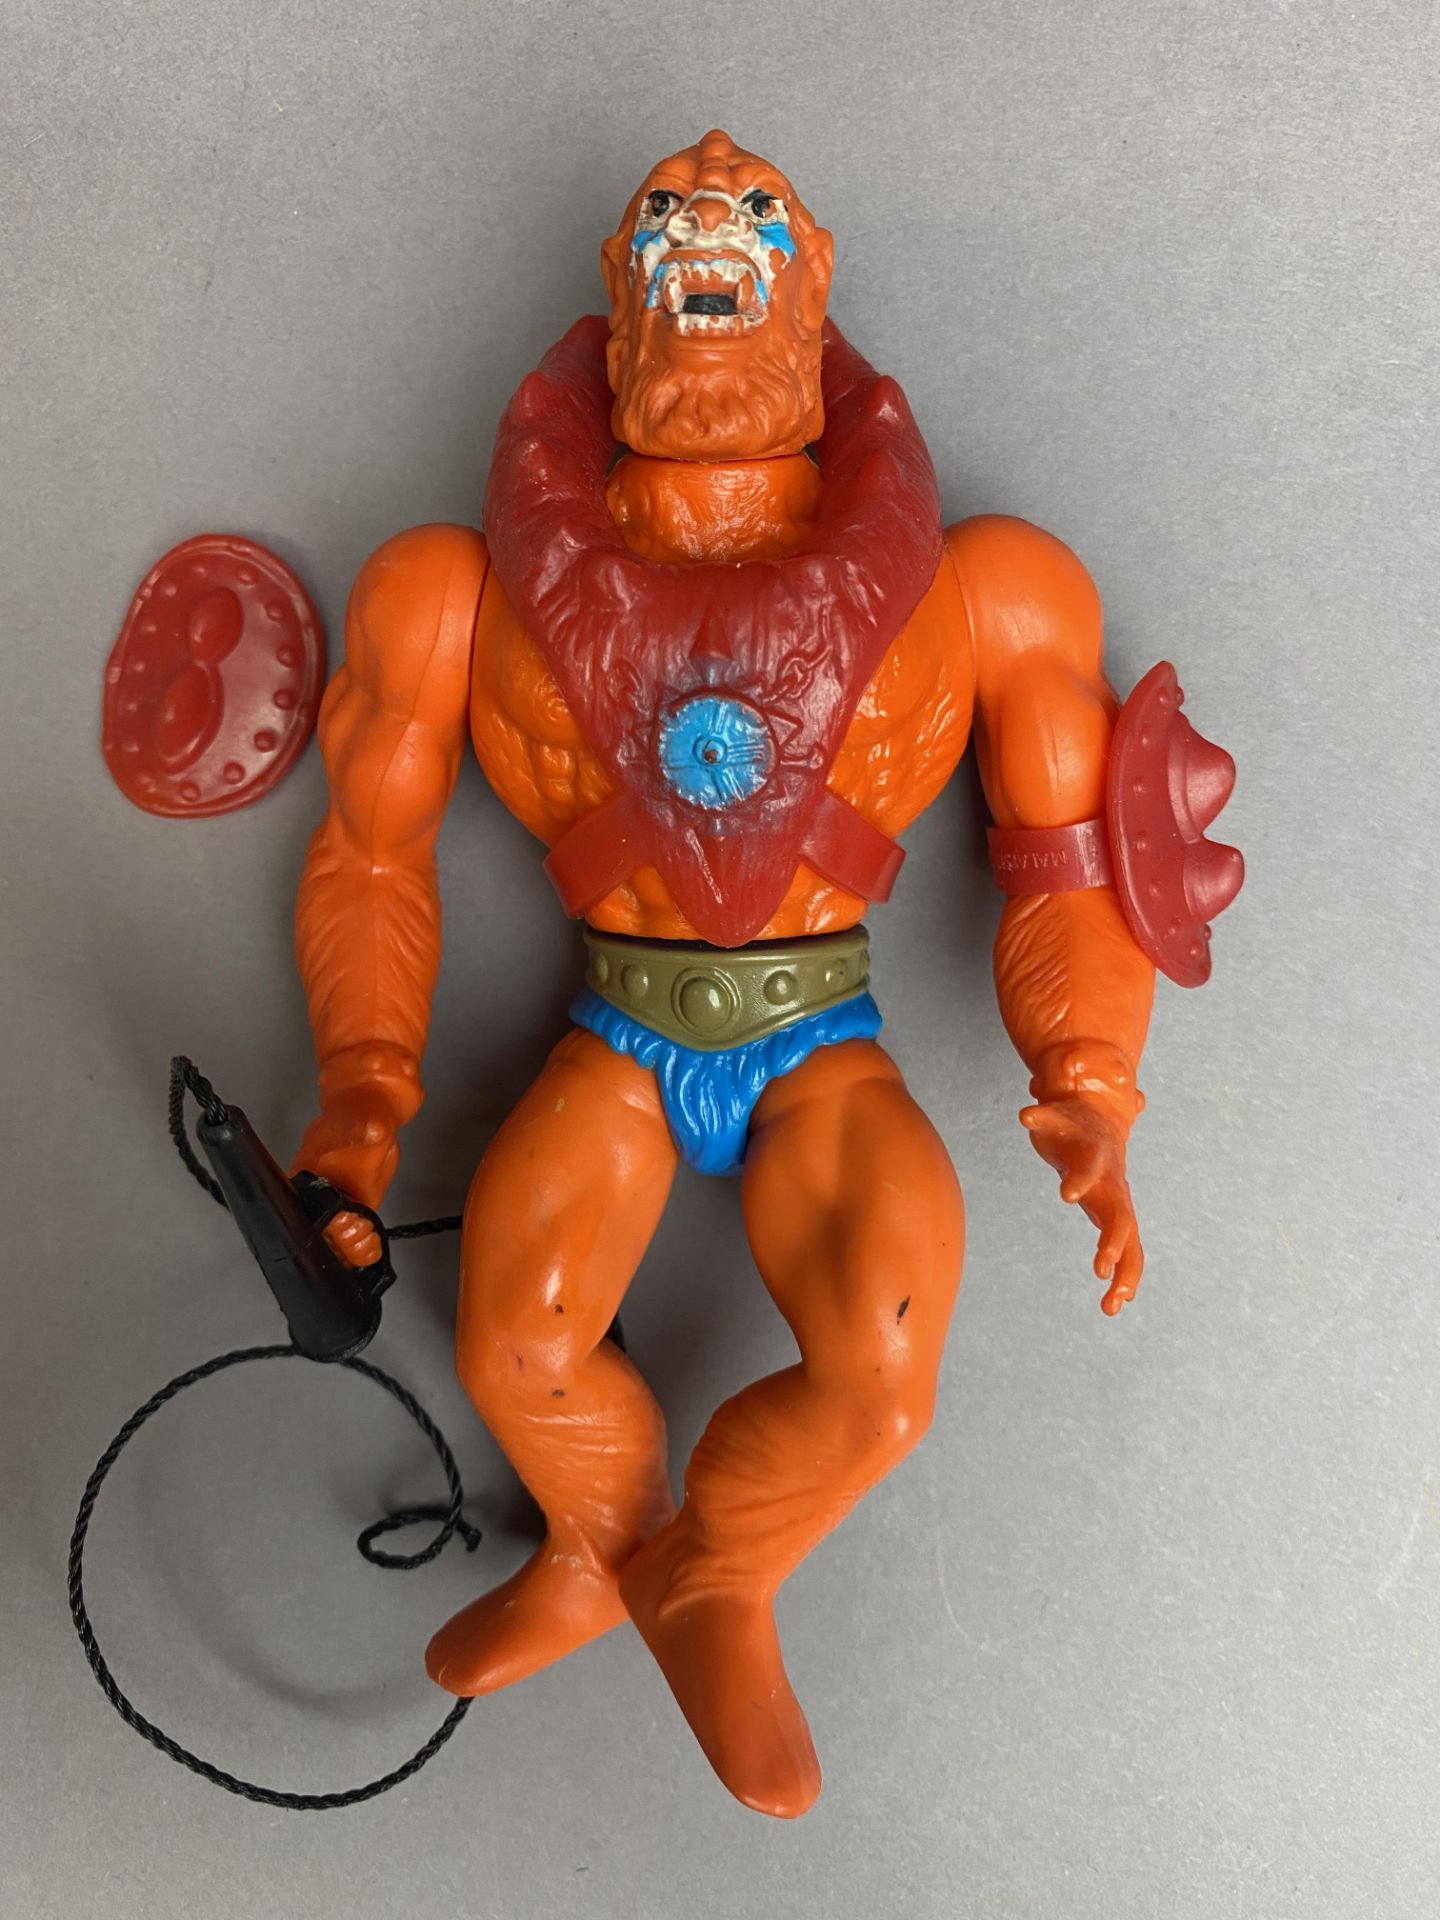 BEASTMAN - Vintage Masters of the Universe Figure (MOTU) Further Information Will